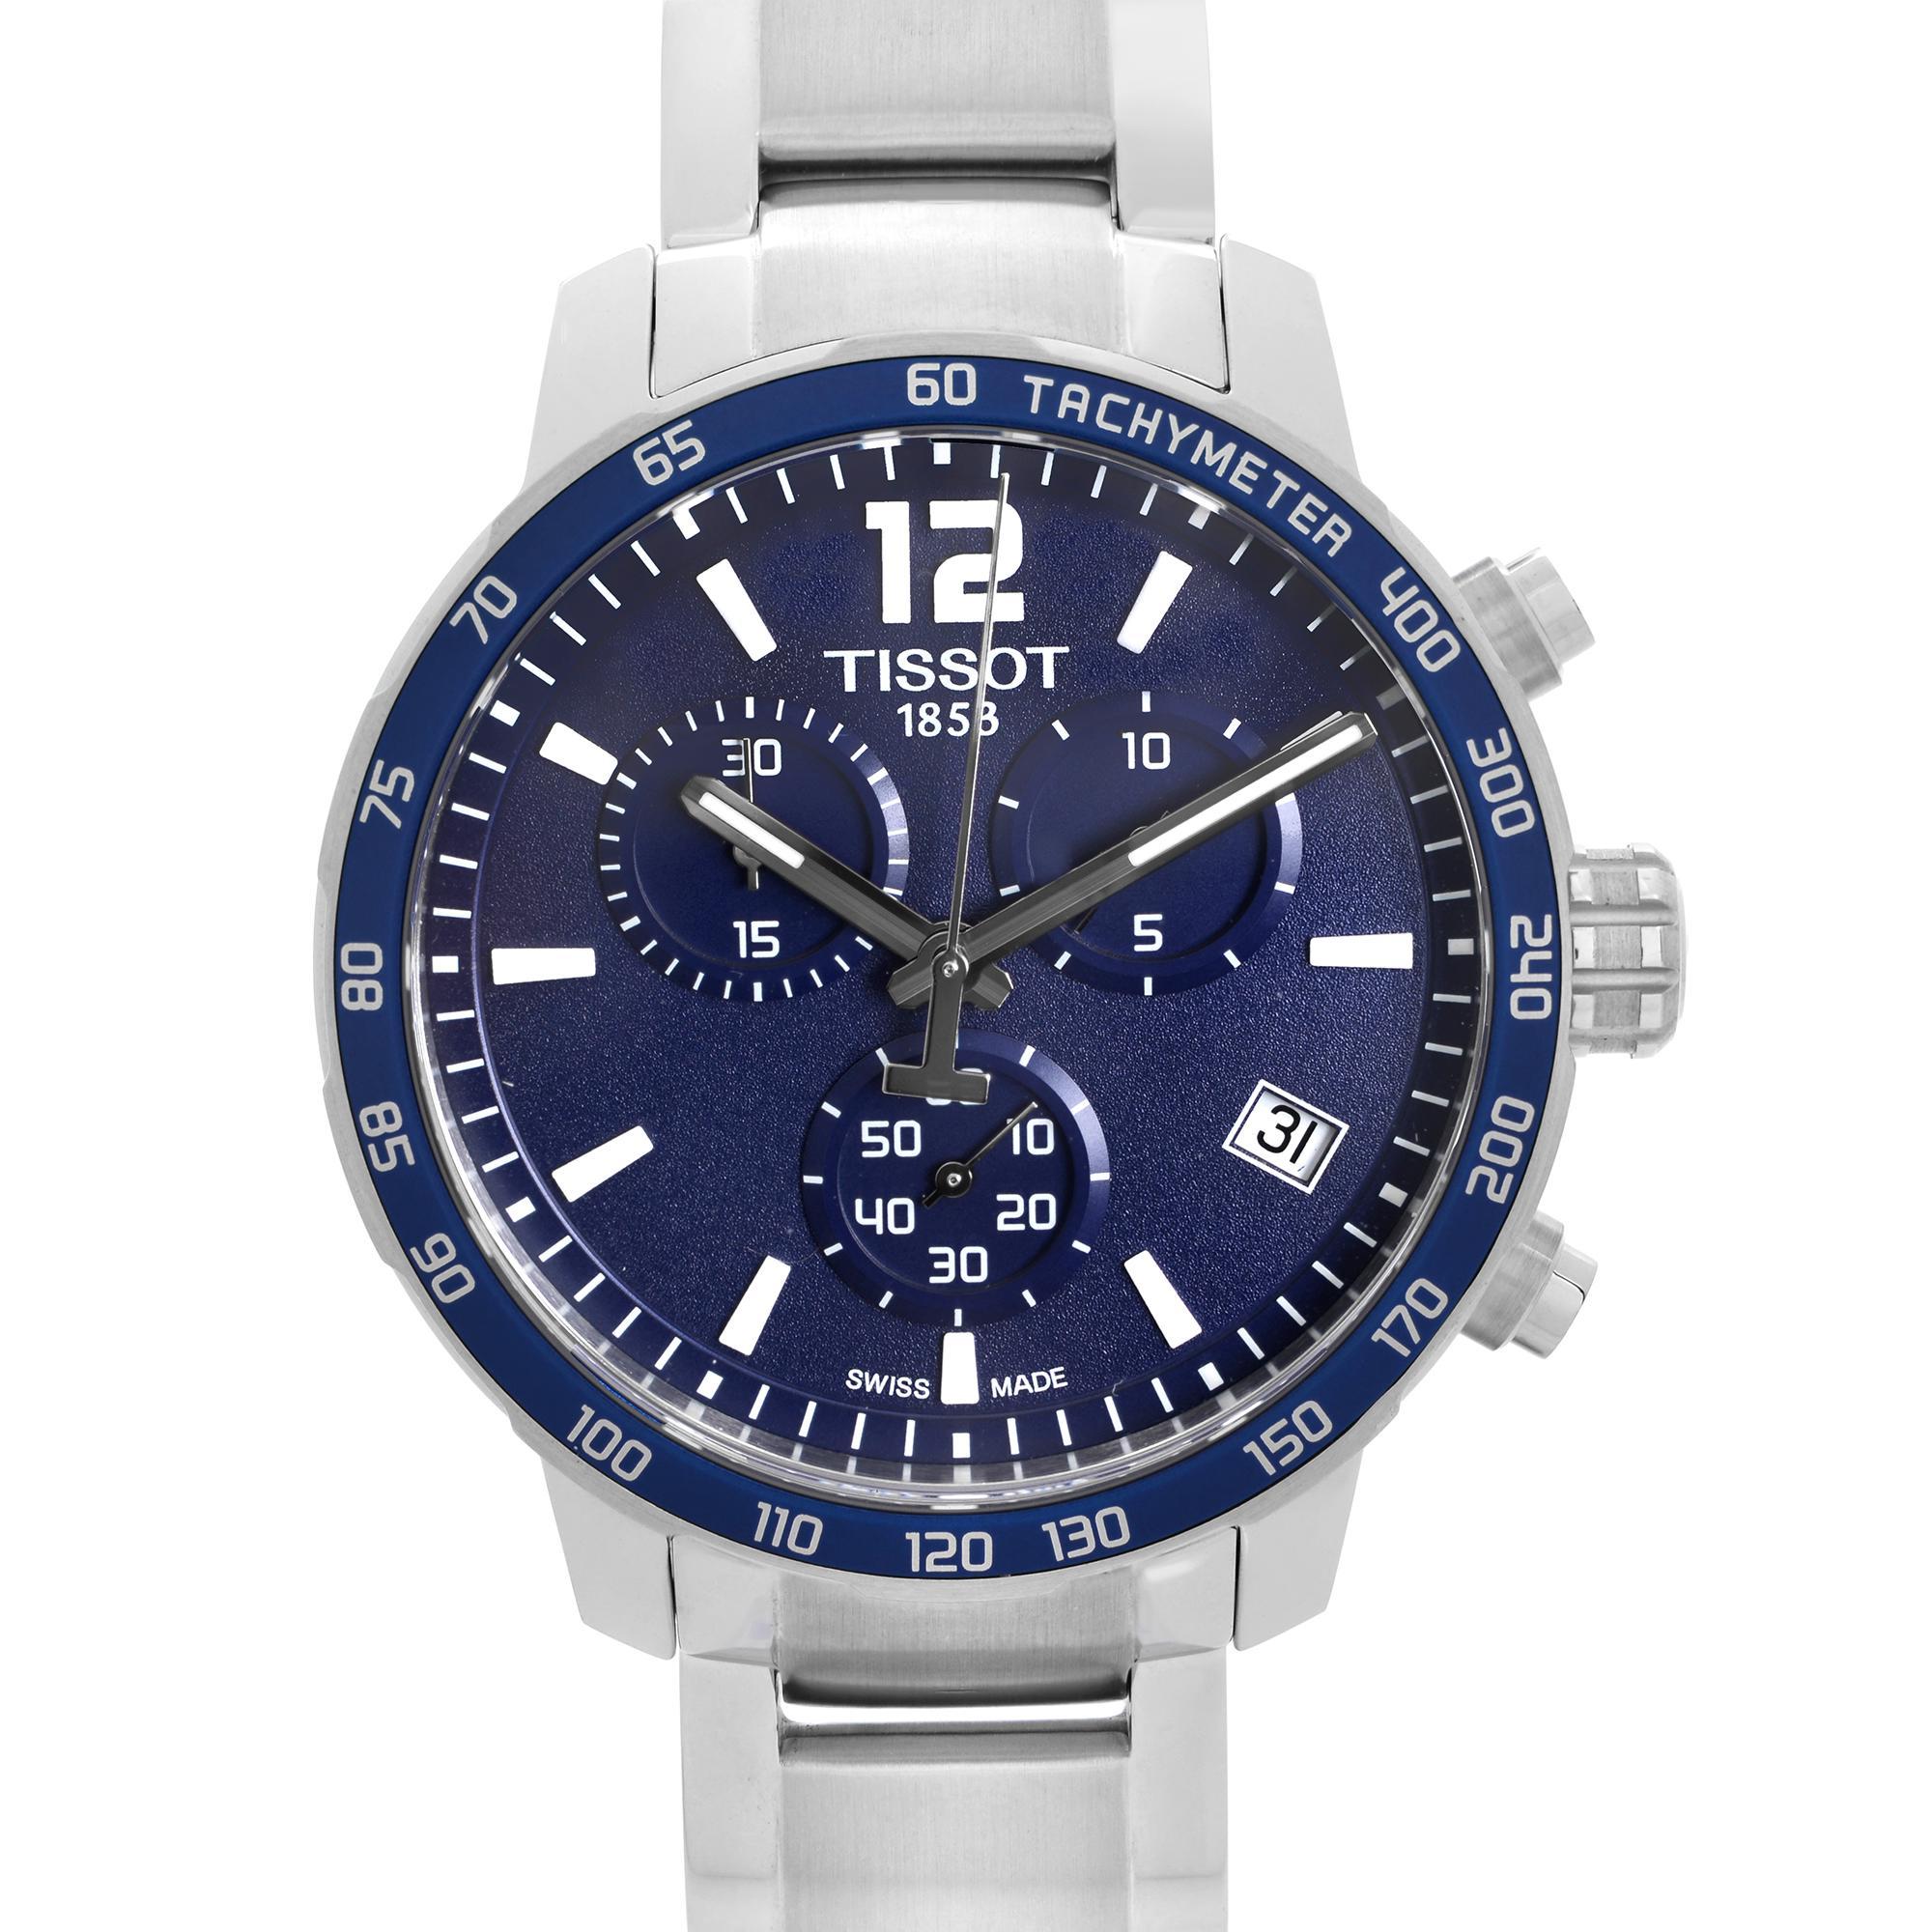 Display Model Tissot Quickster Quartz Men's Watch T095.417.11.047.00. Minor blemishes on the case back and case due to handling. This Beautiful Timepiece is Powered by Quartz (Battery) Movement And Features: Round Stainless Steel Case & Bracelet,